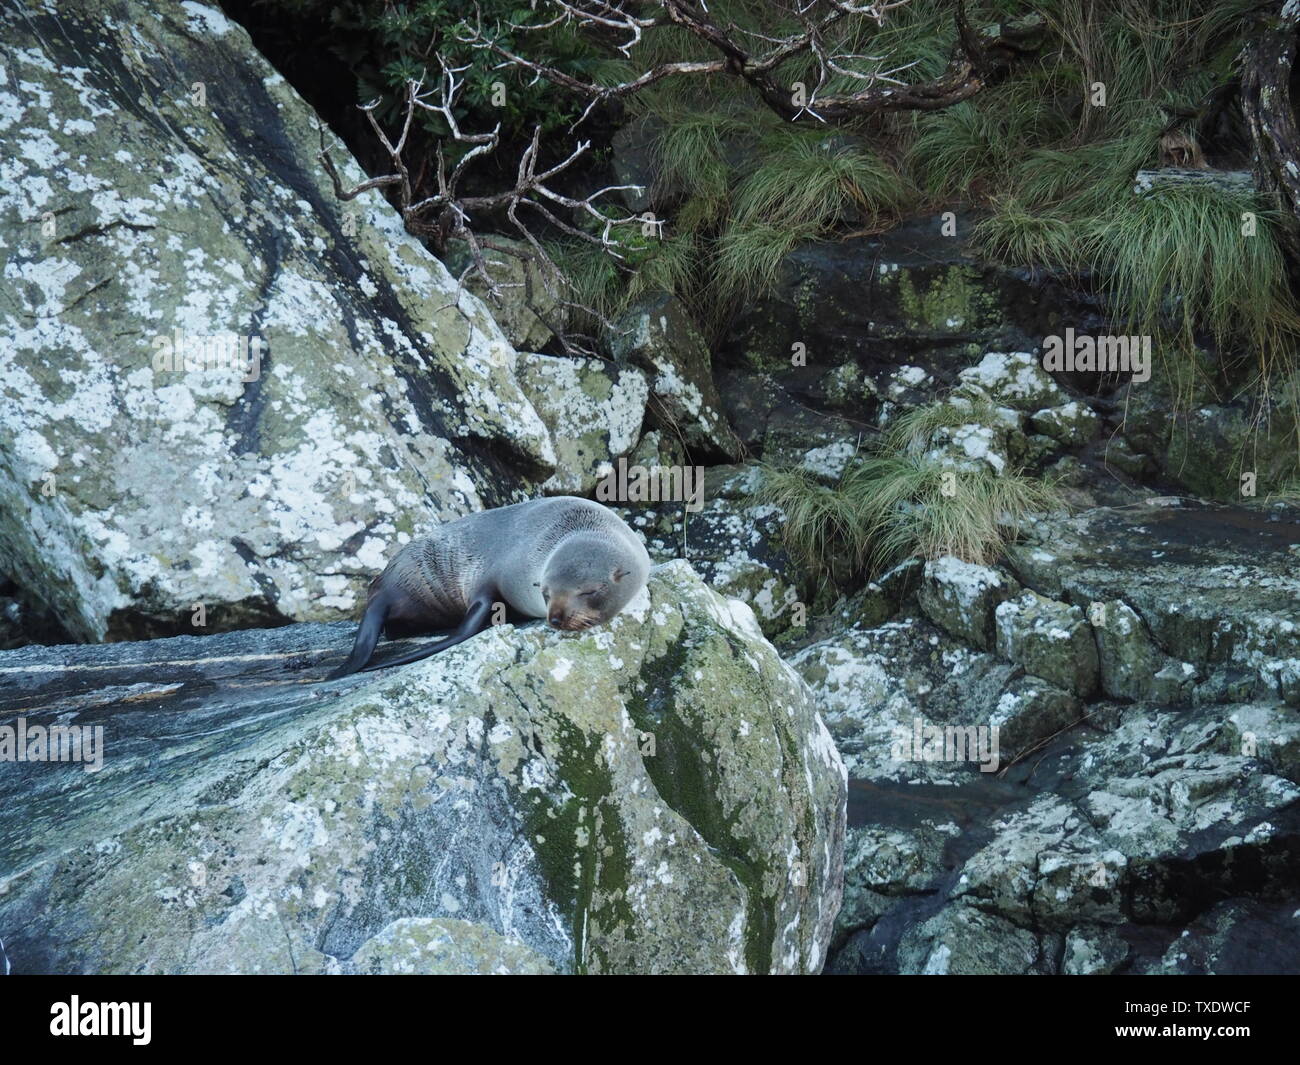 A seal taking a nap on a rock Stock Photo